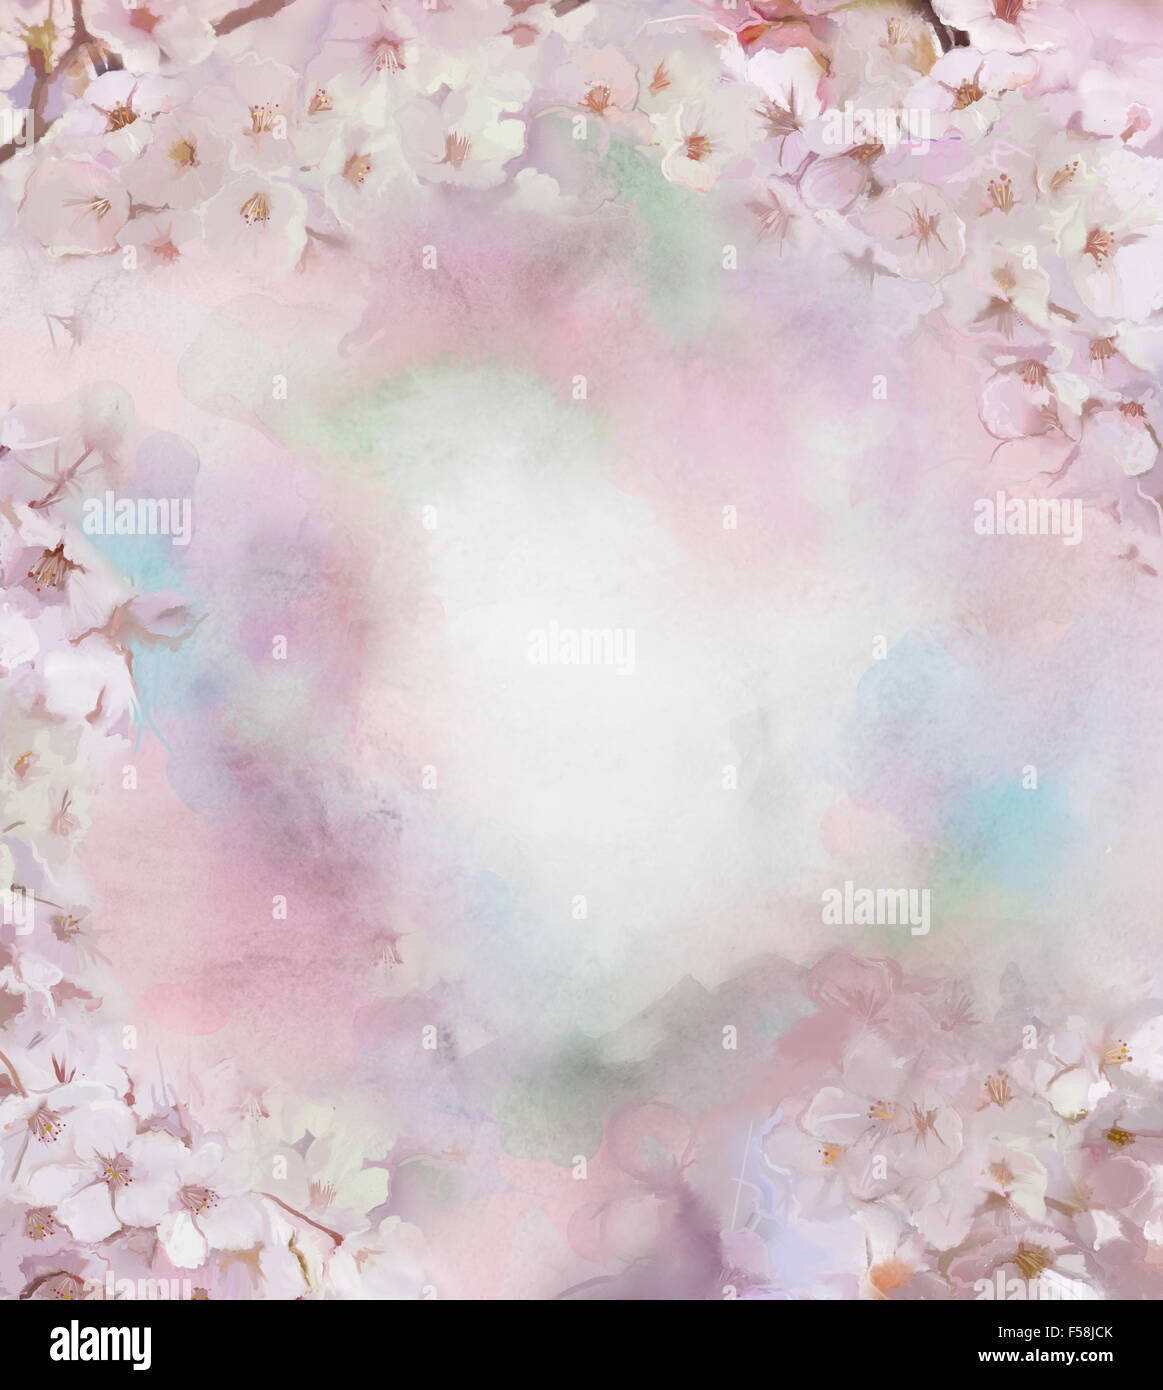 Cherry blossom flower oil painting ,vintage floral composition in soft color and blur style background Stock Photo